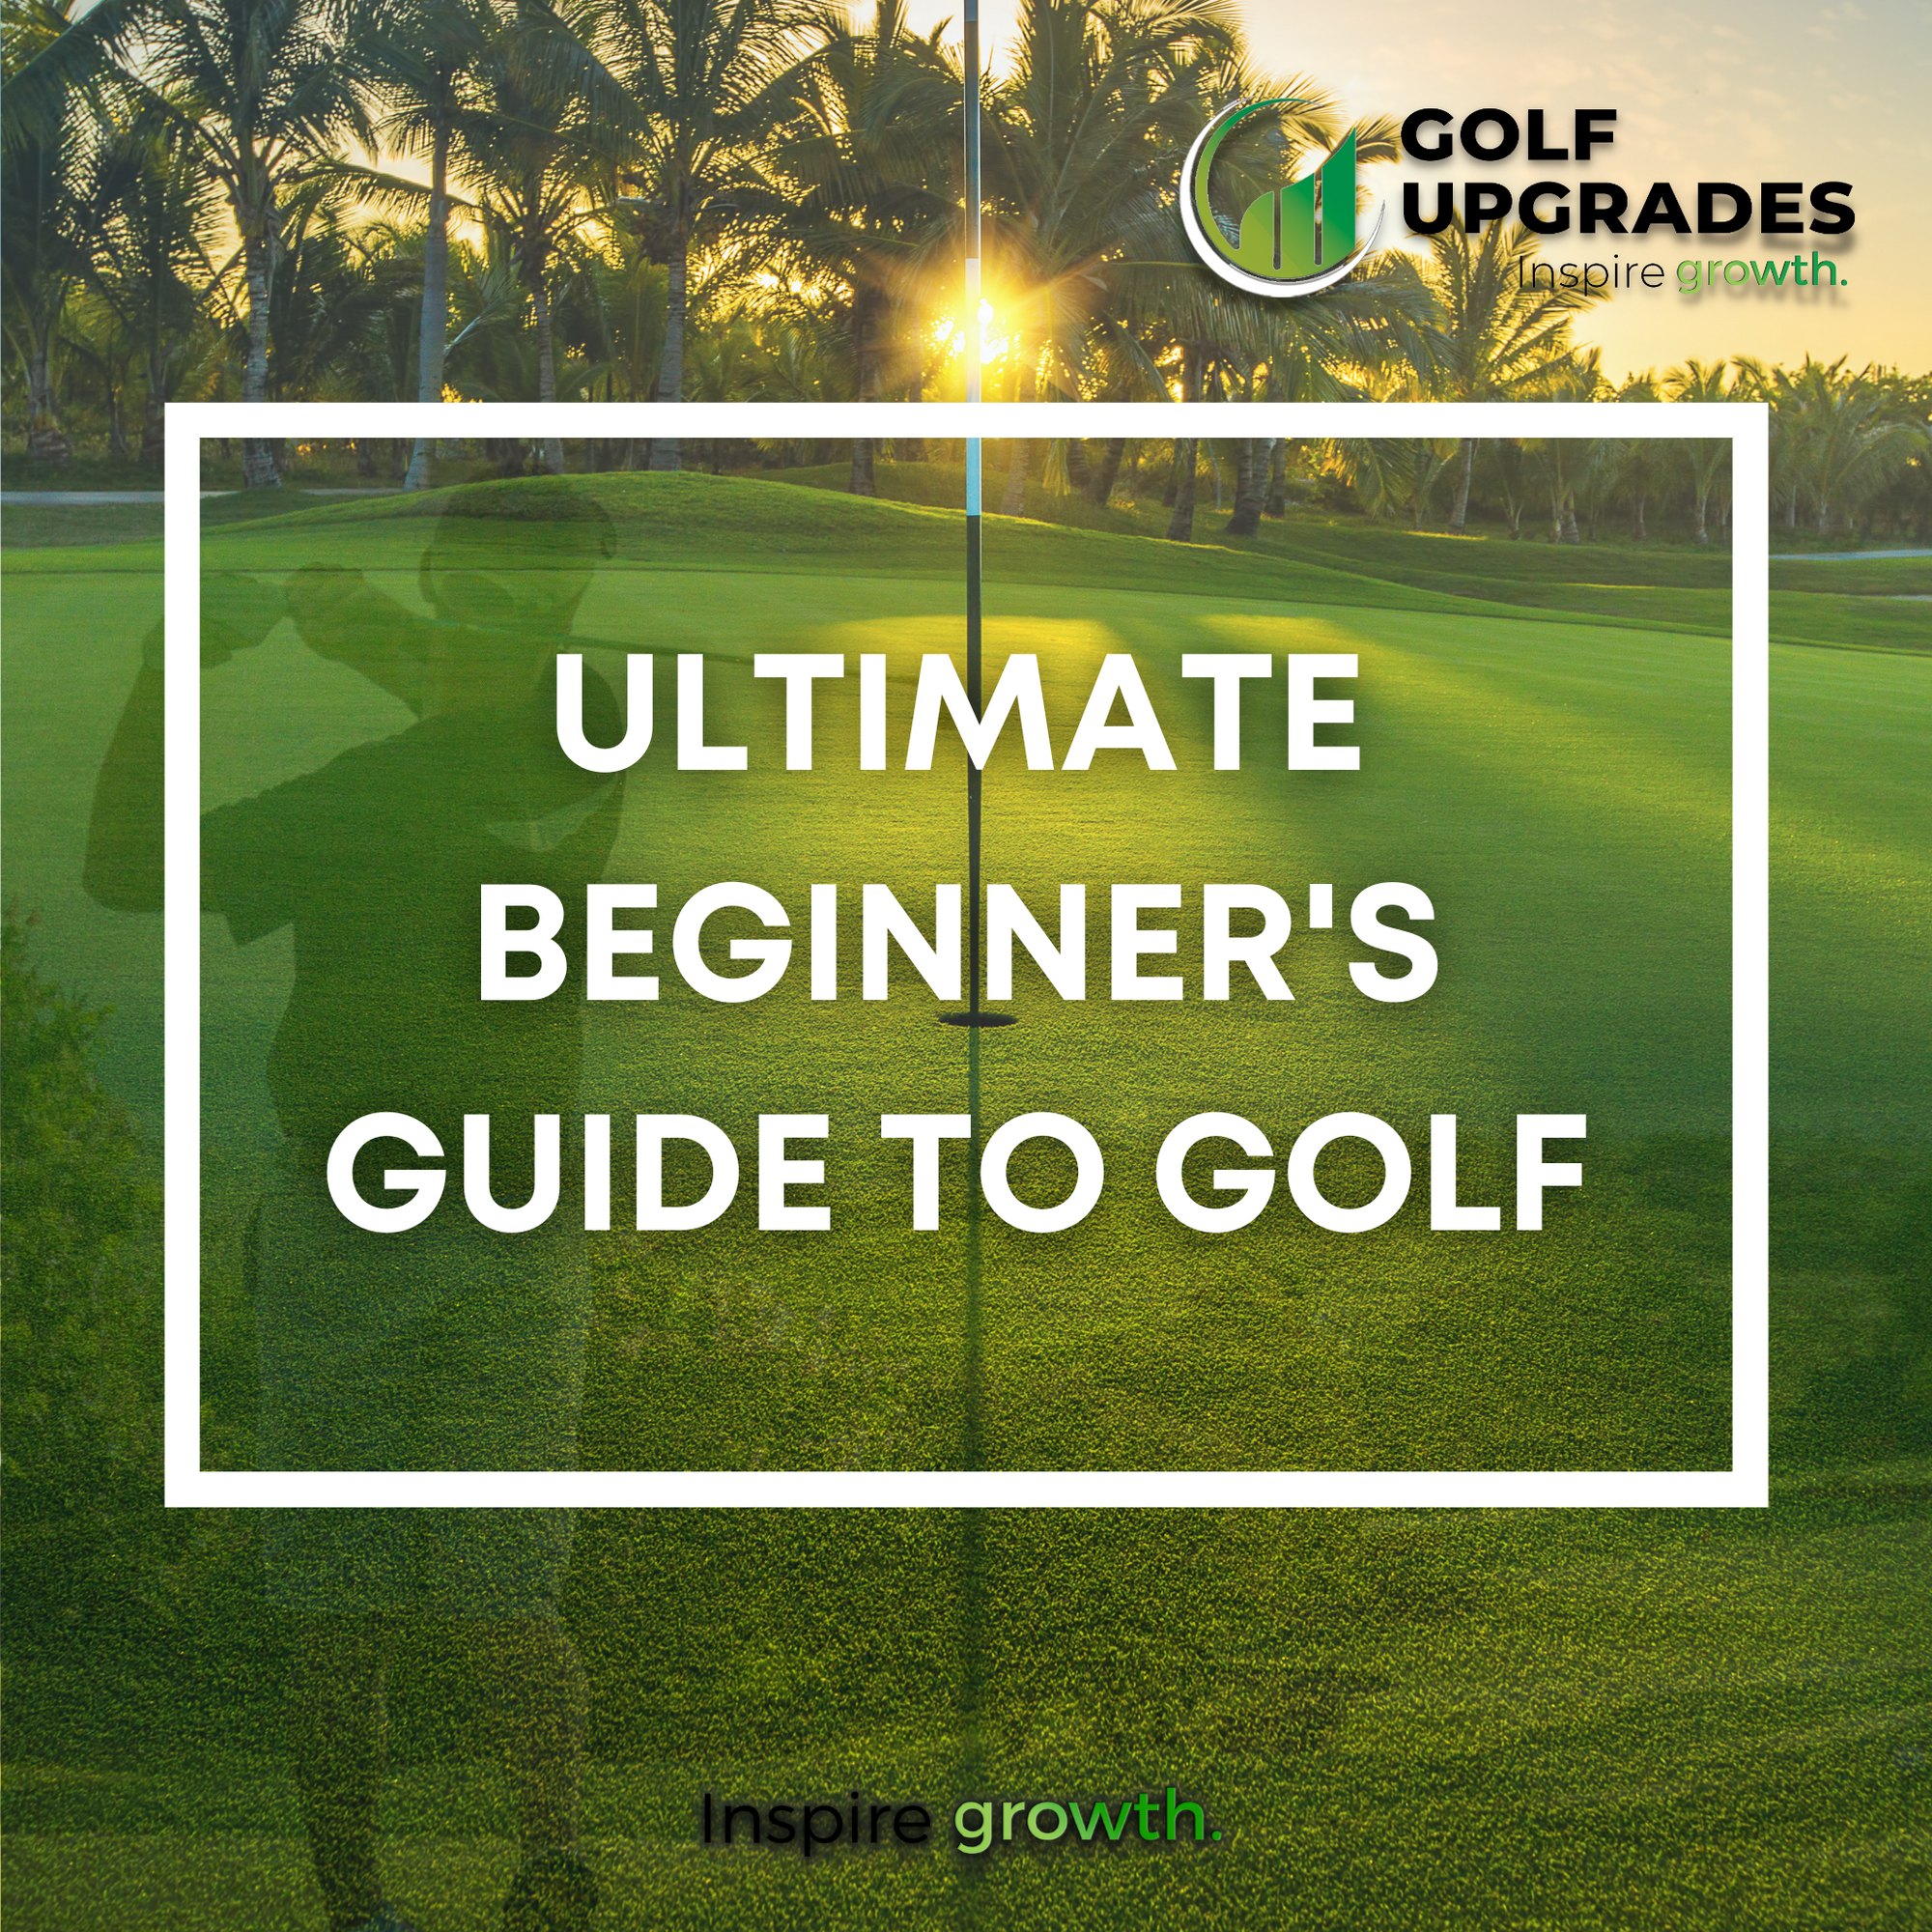 The Ultimate Beginner's Guide to Golf